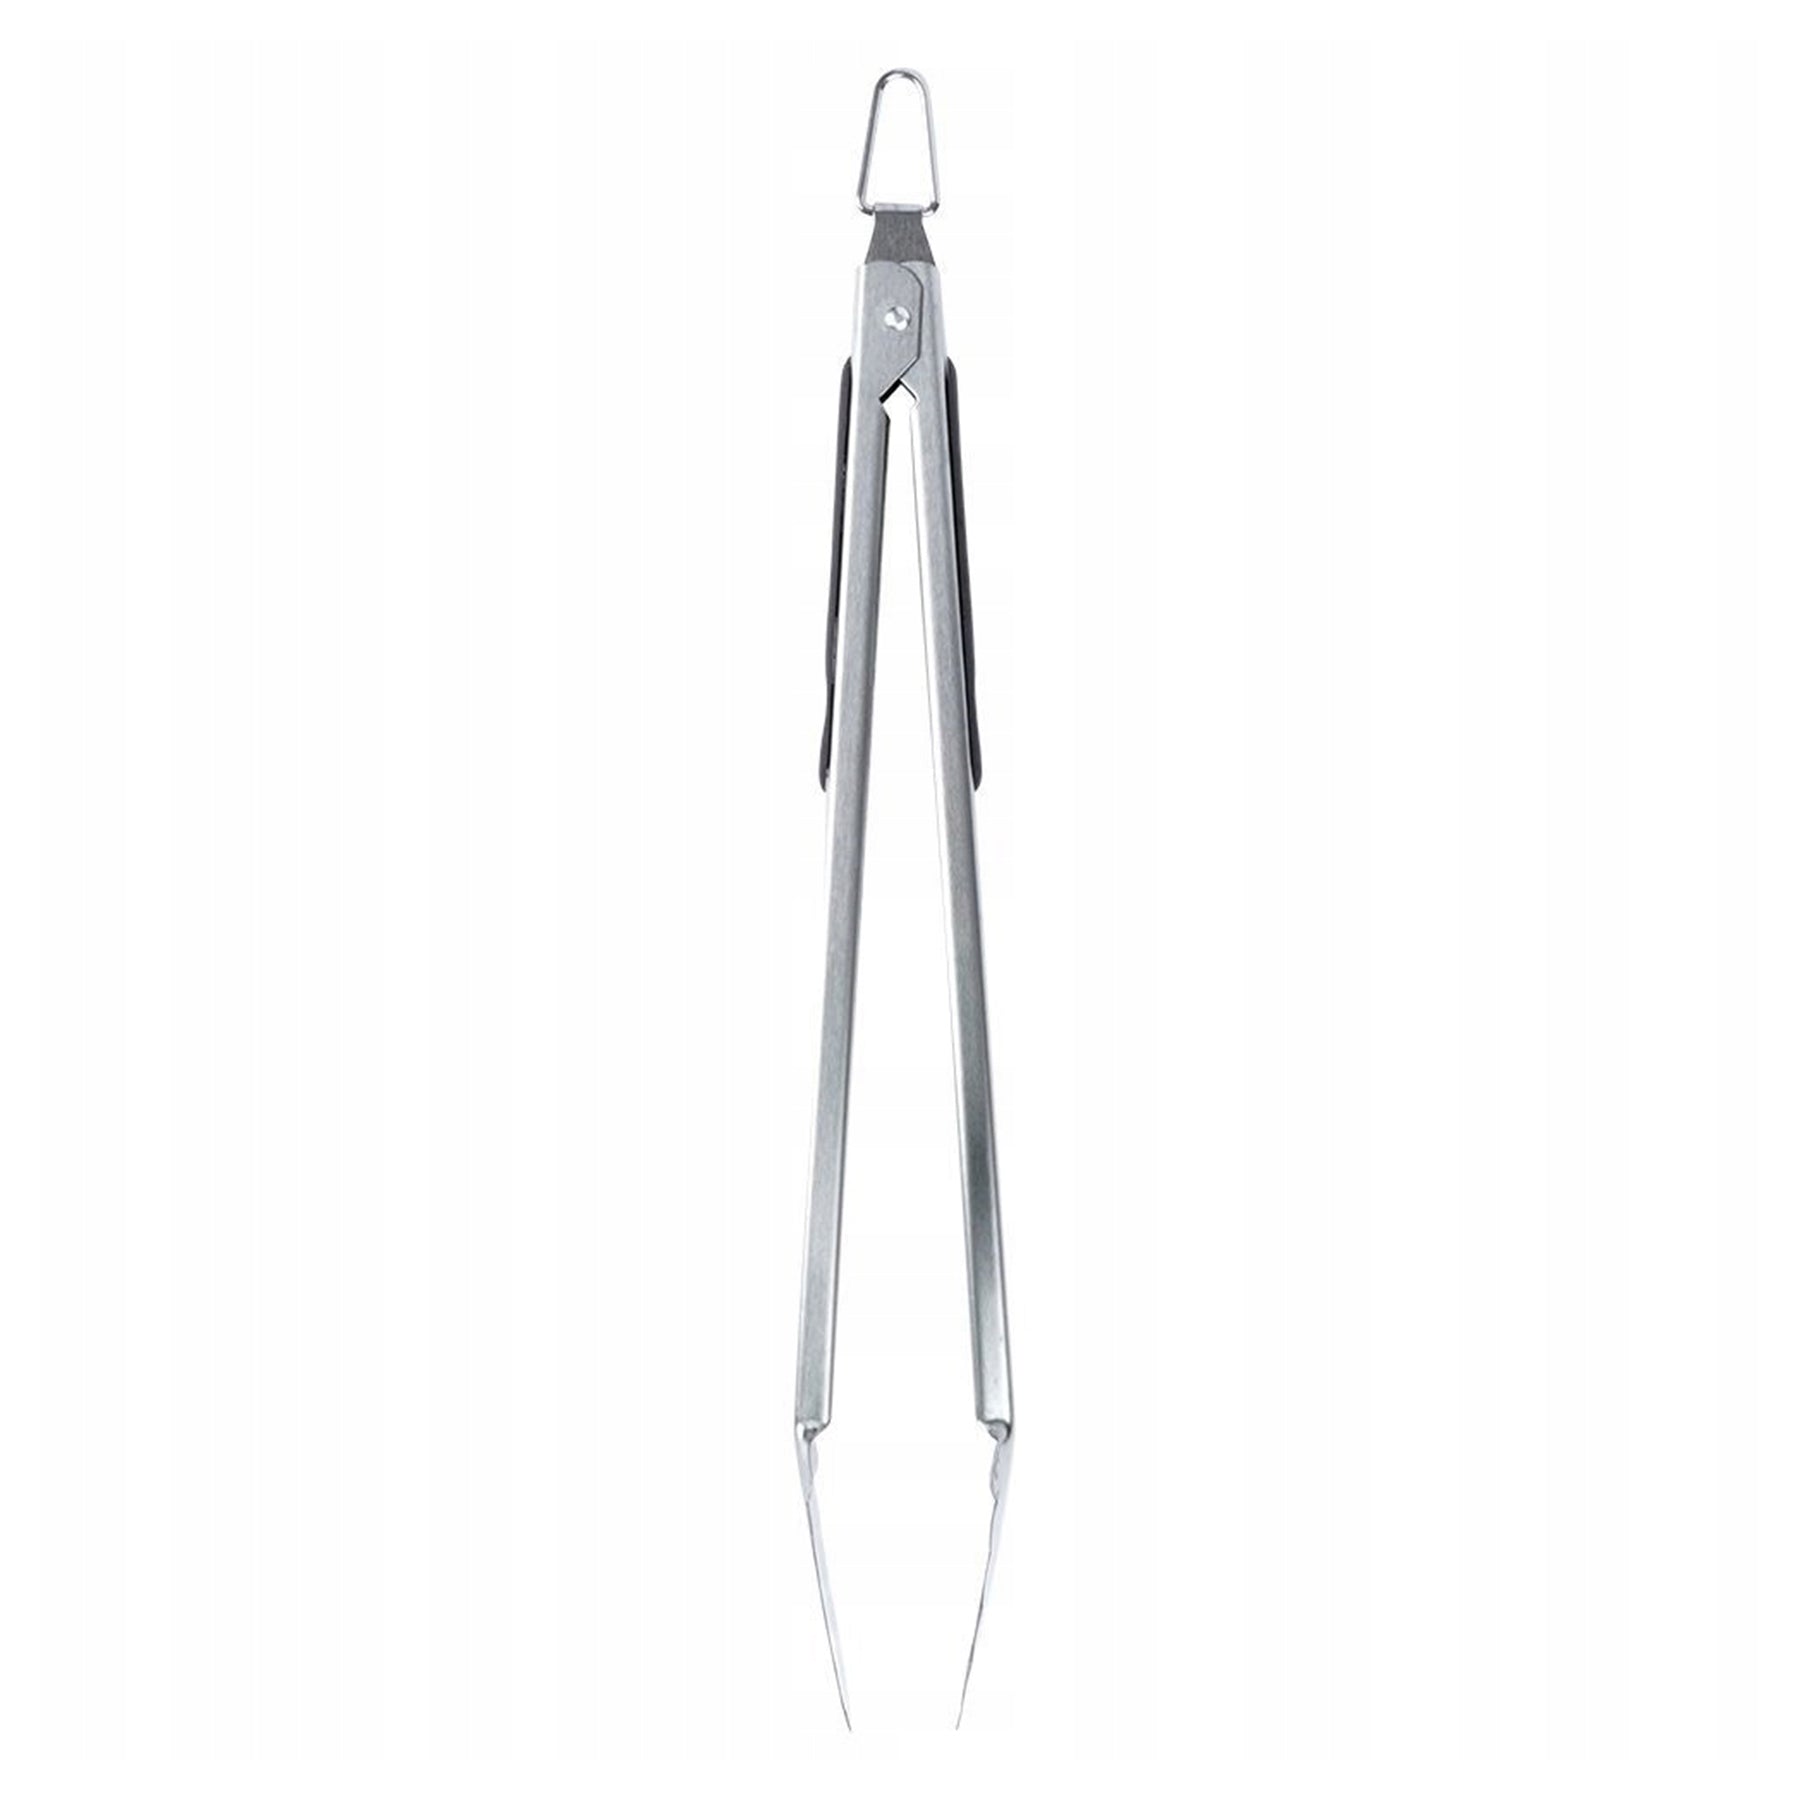 Barbecue tongs